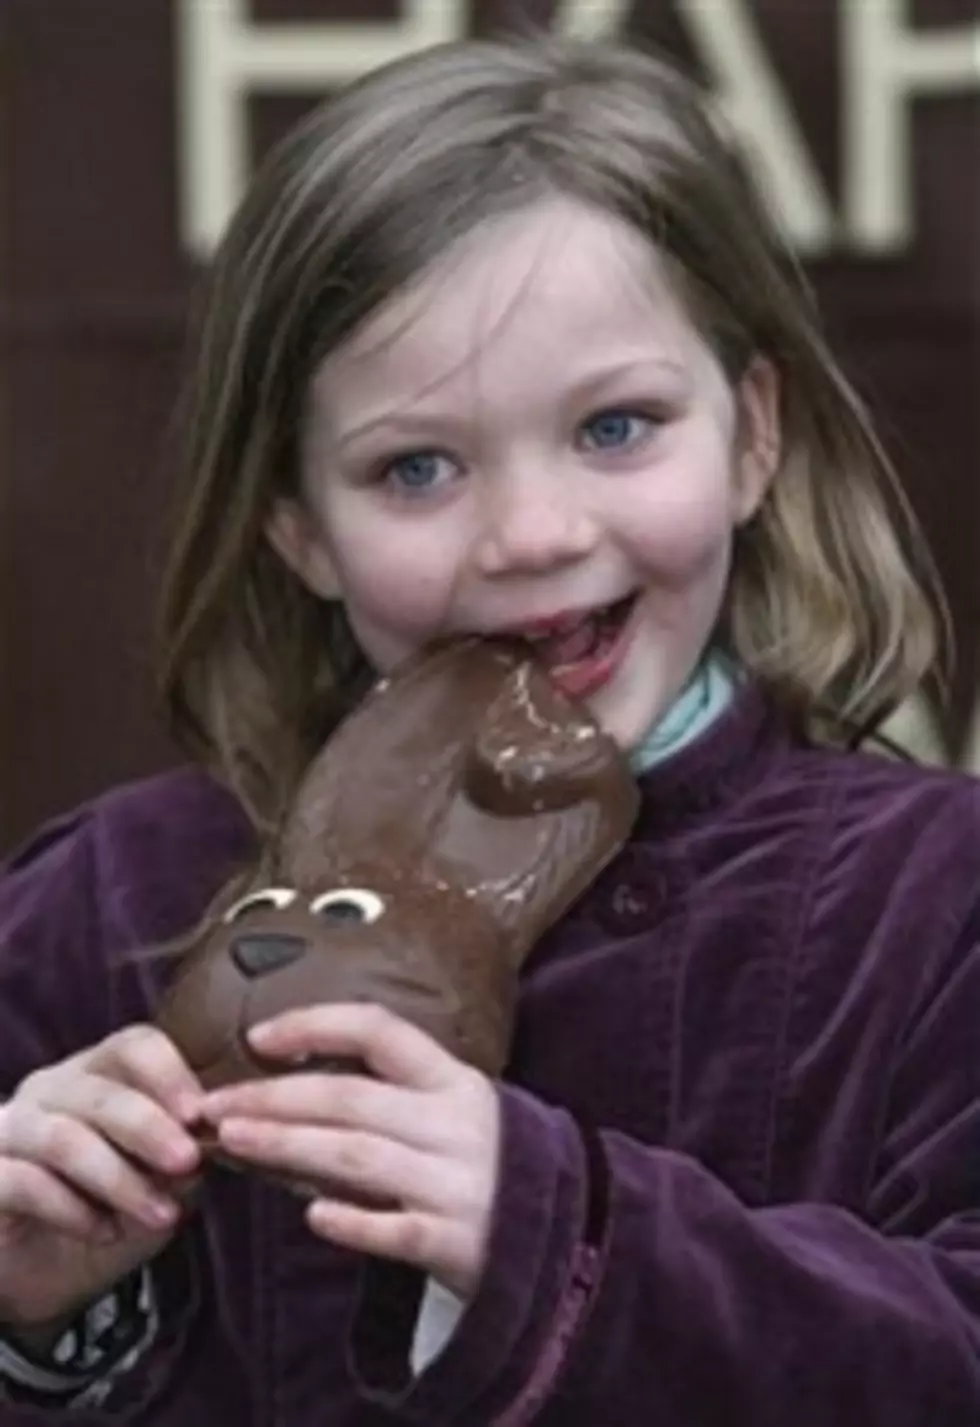 This Is How To Eat A Chocolate Bunny for Easter